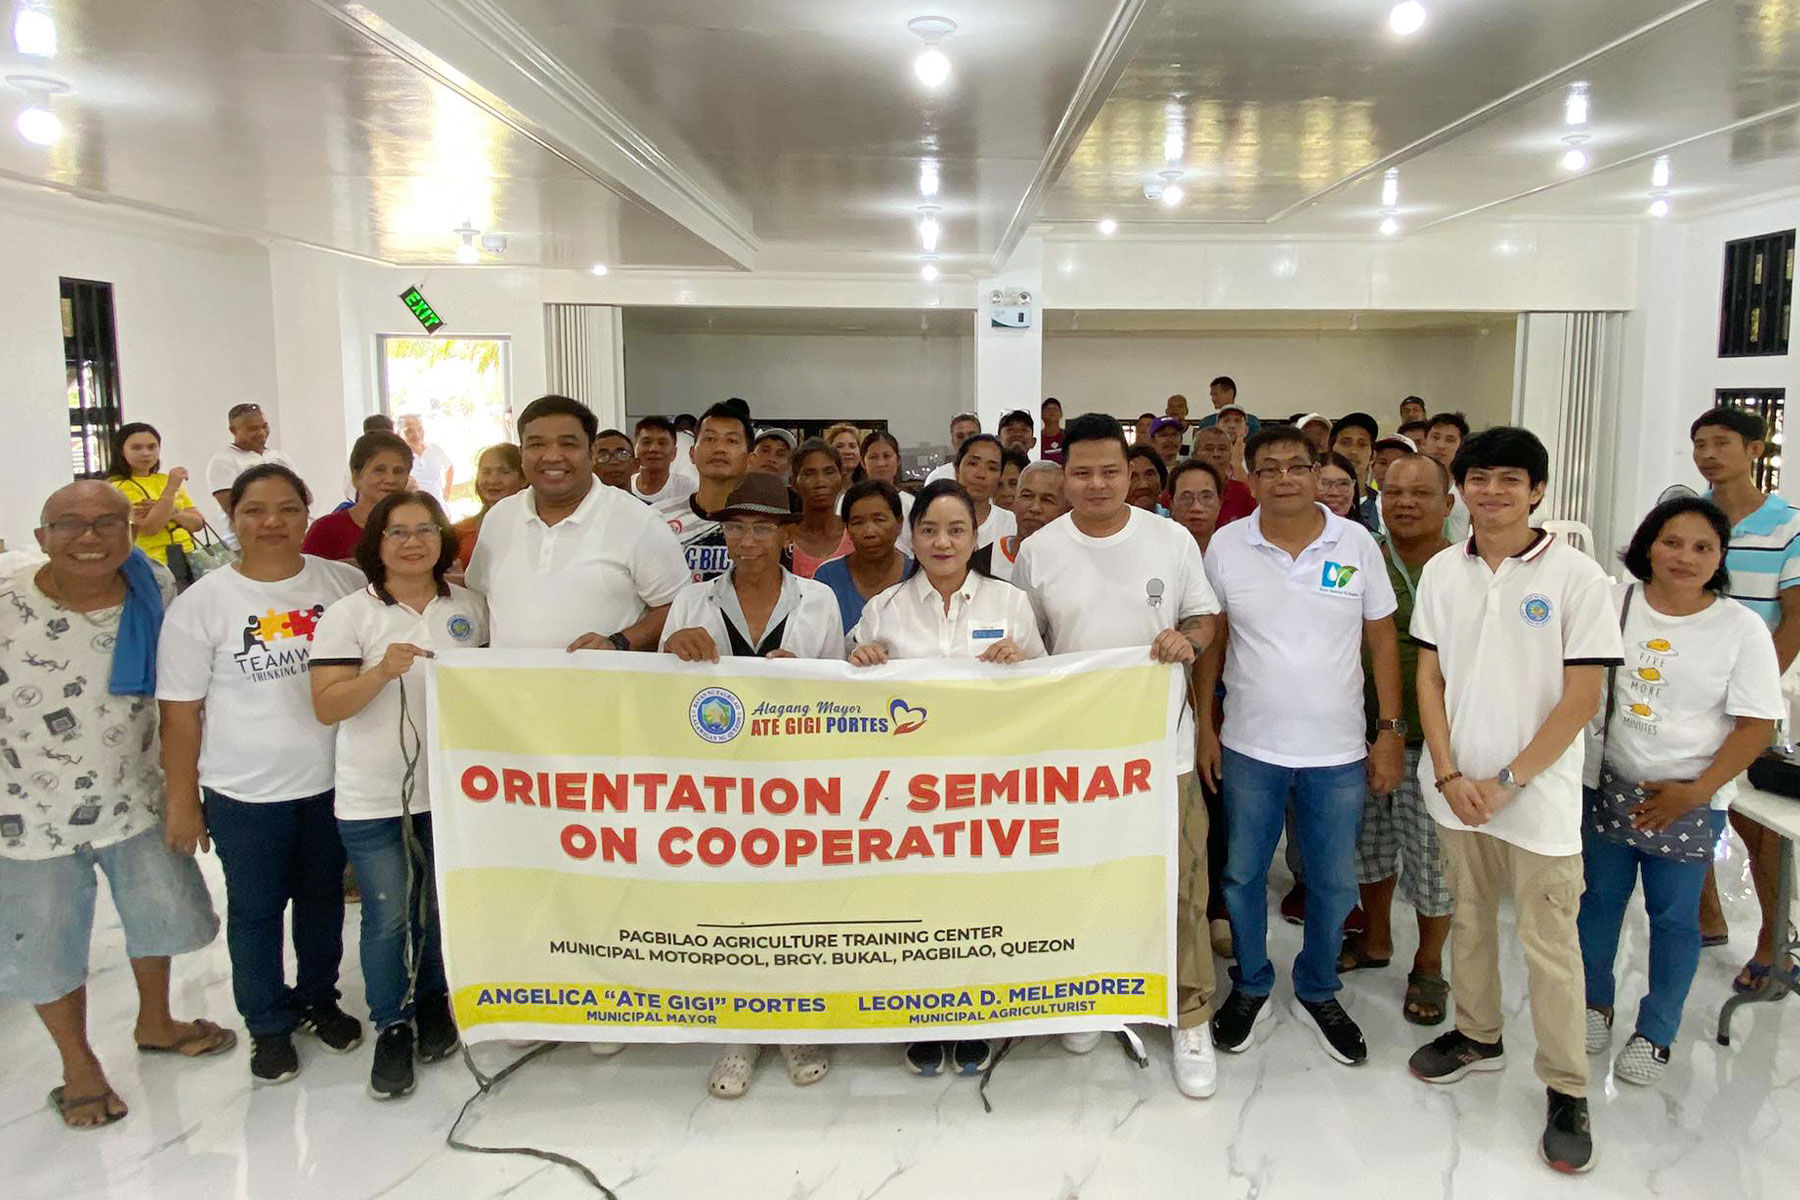 Orientation and Seminar on Cooperatives